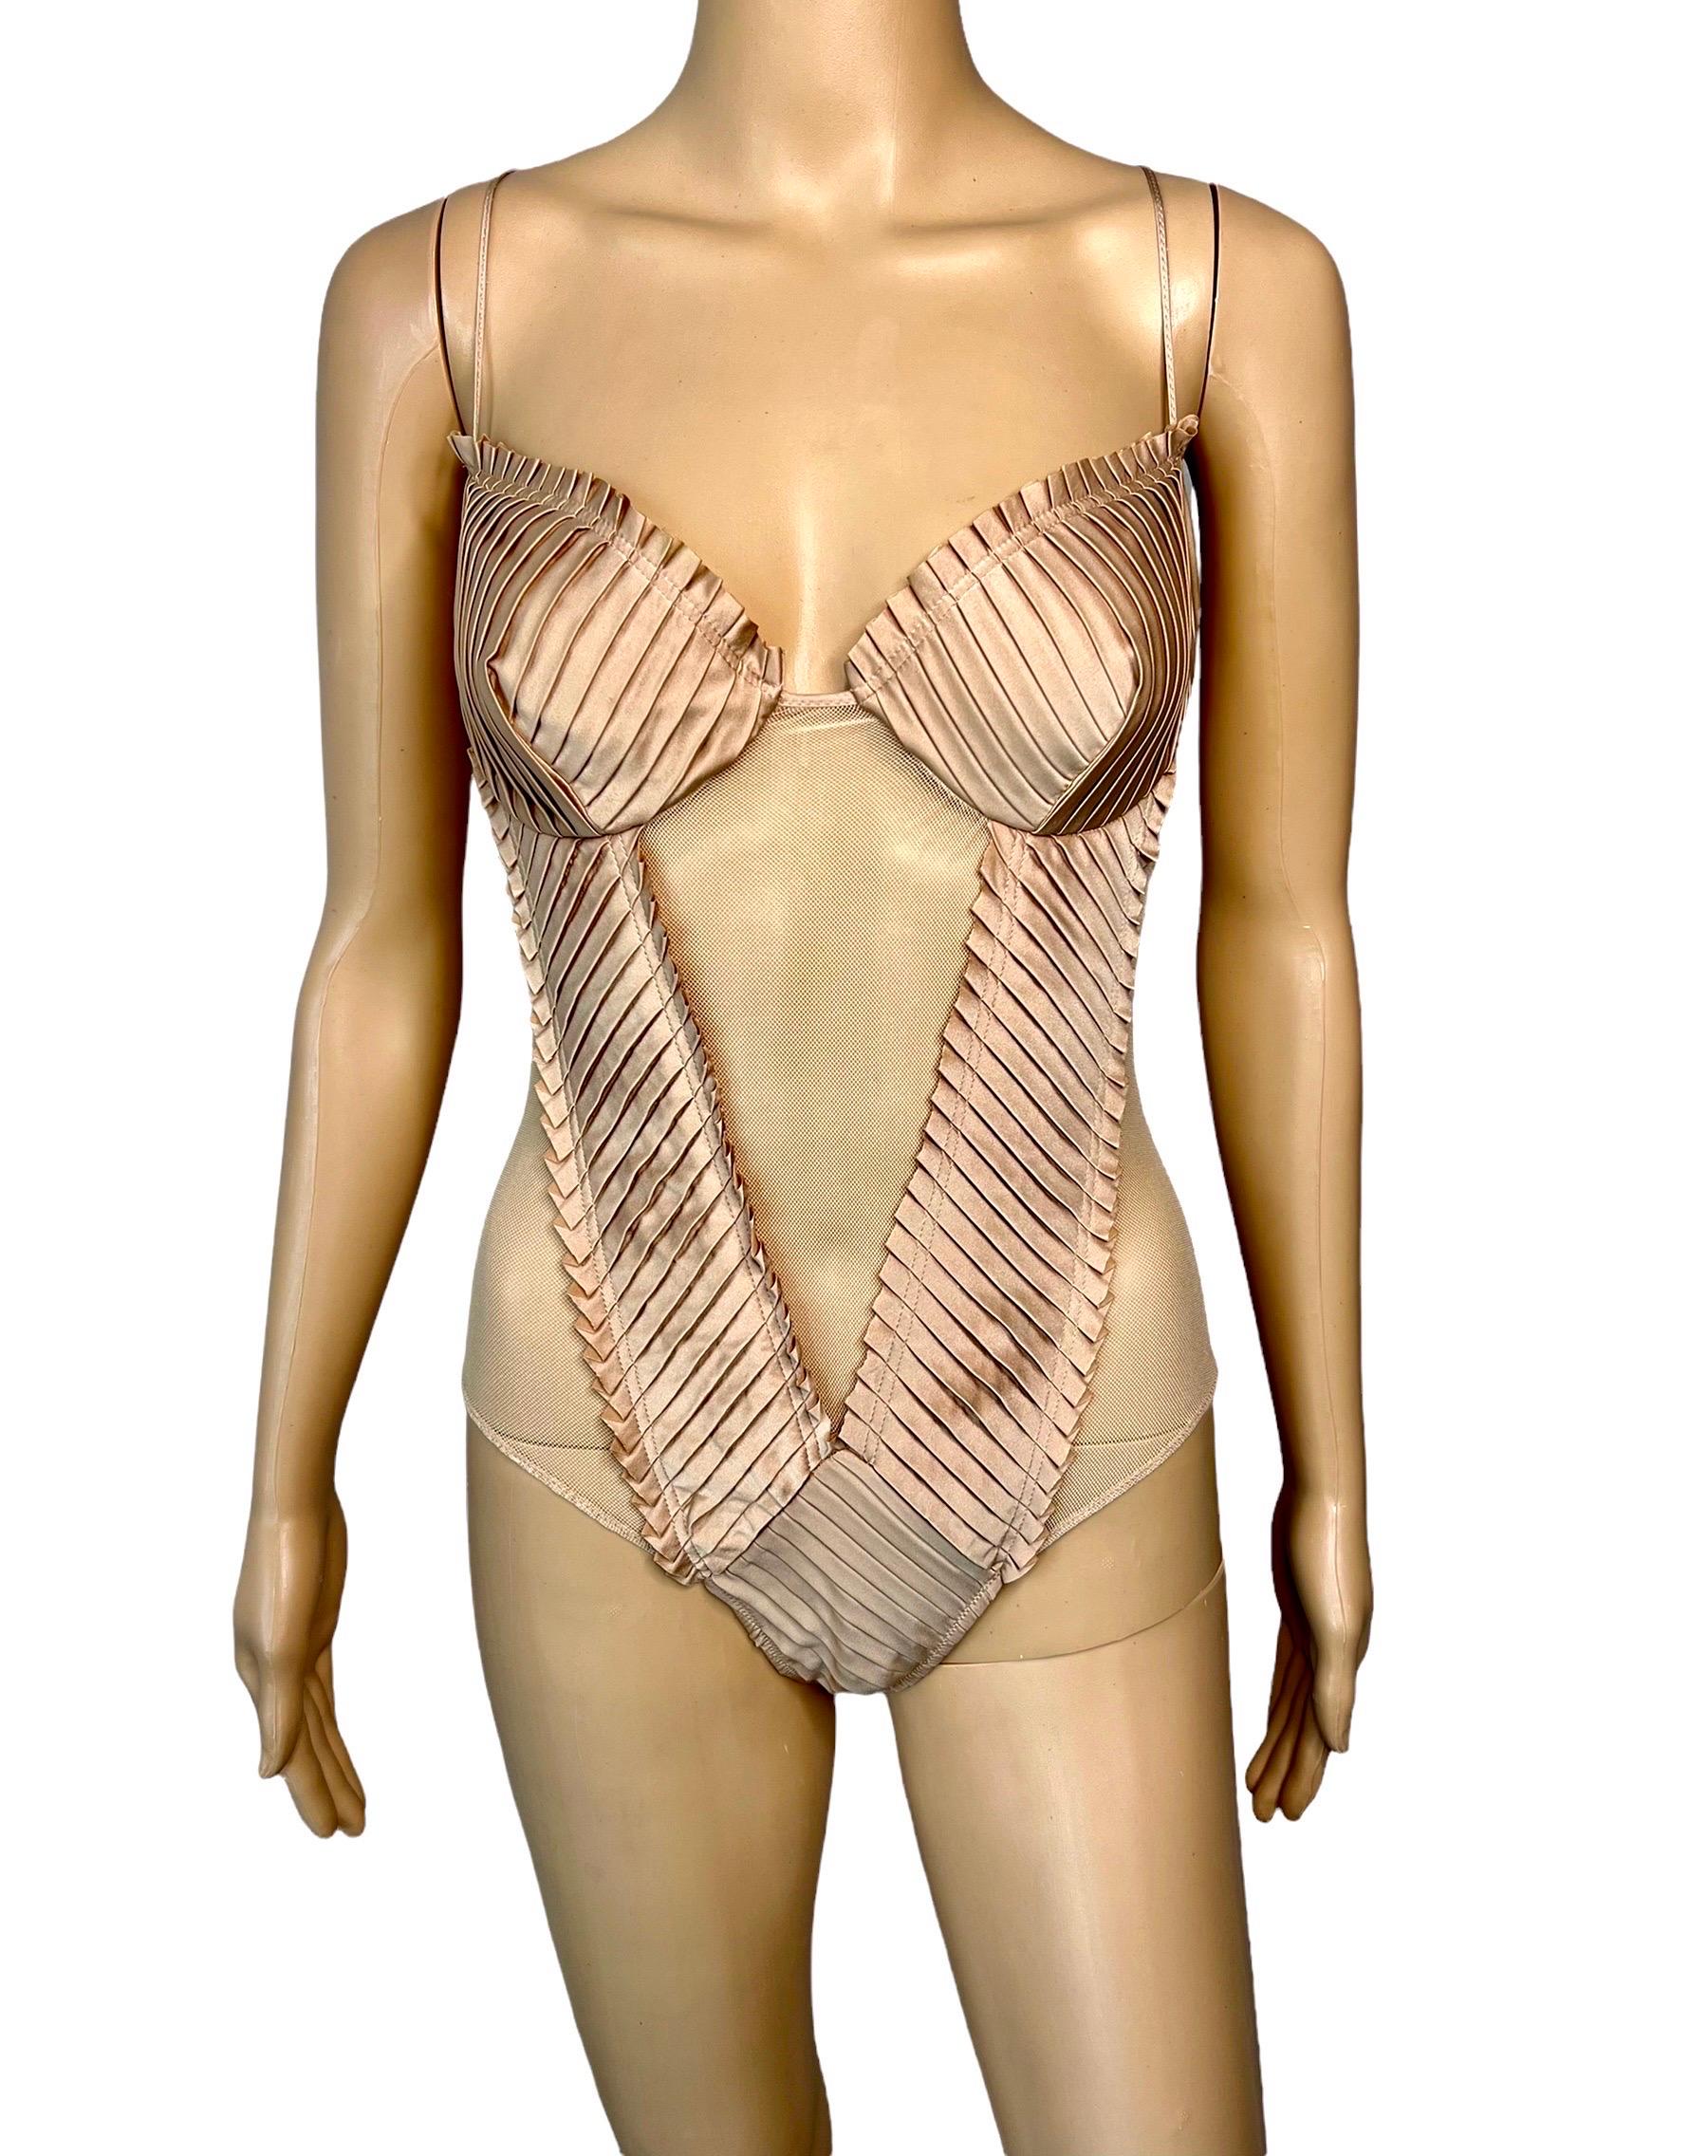 Tom Ford for Gucci S/S 2004 Runway Bustier Sheer Cutout Lingerie Bodysuit Top For Sale 1